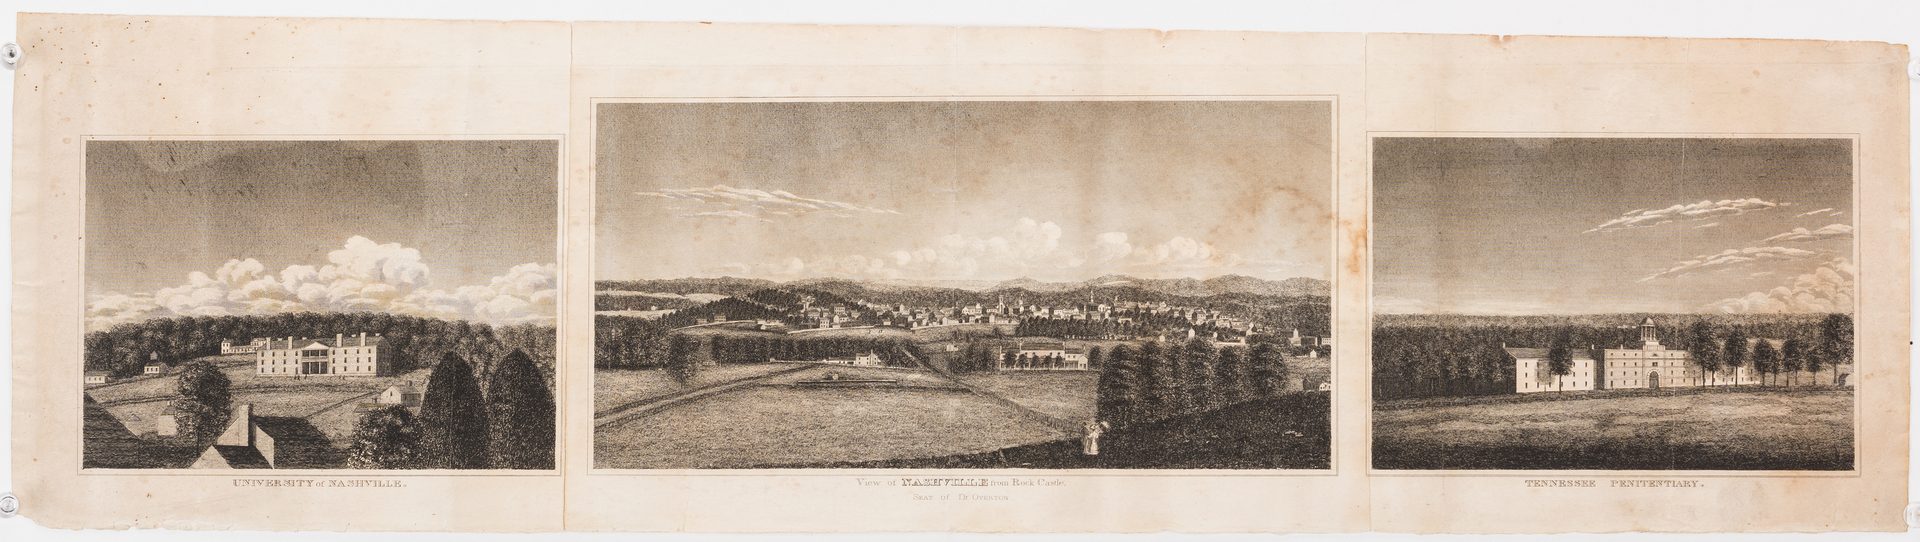 Lot 284: Early View of Nashville